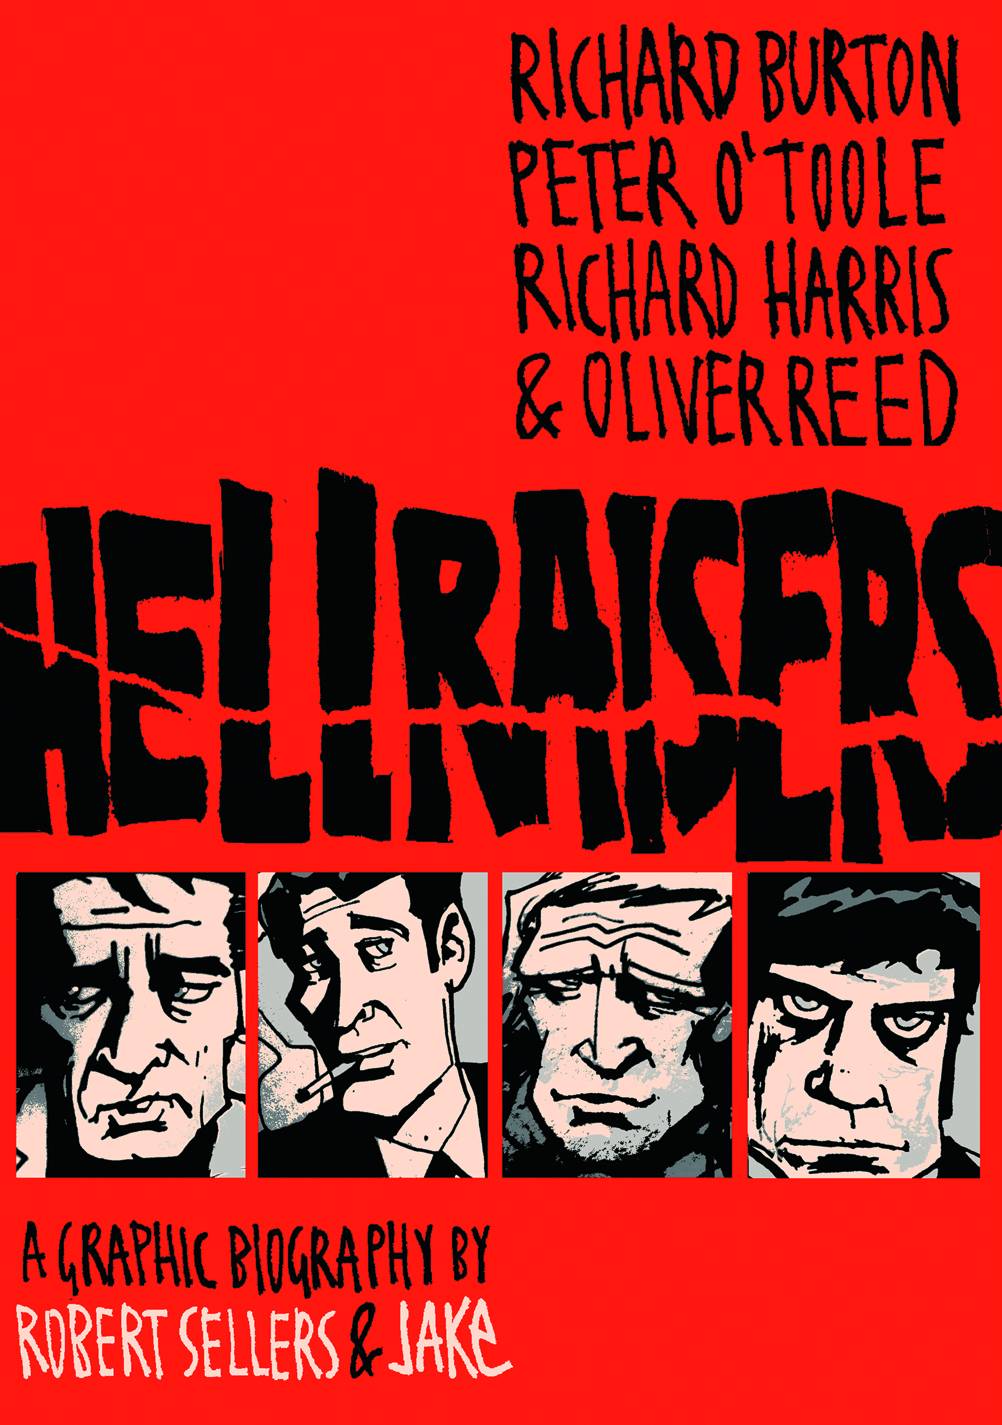 Hellraisers Graphic Biographies GN